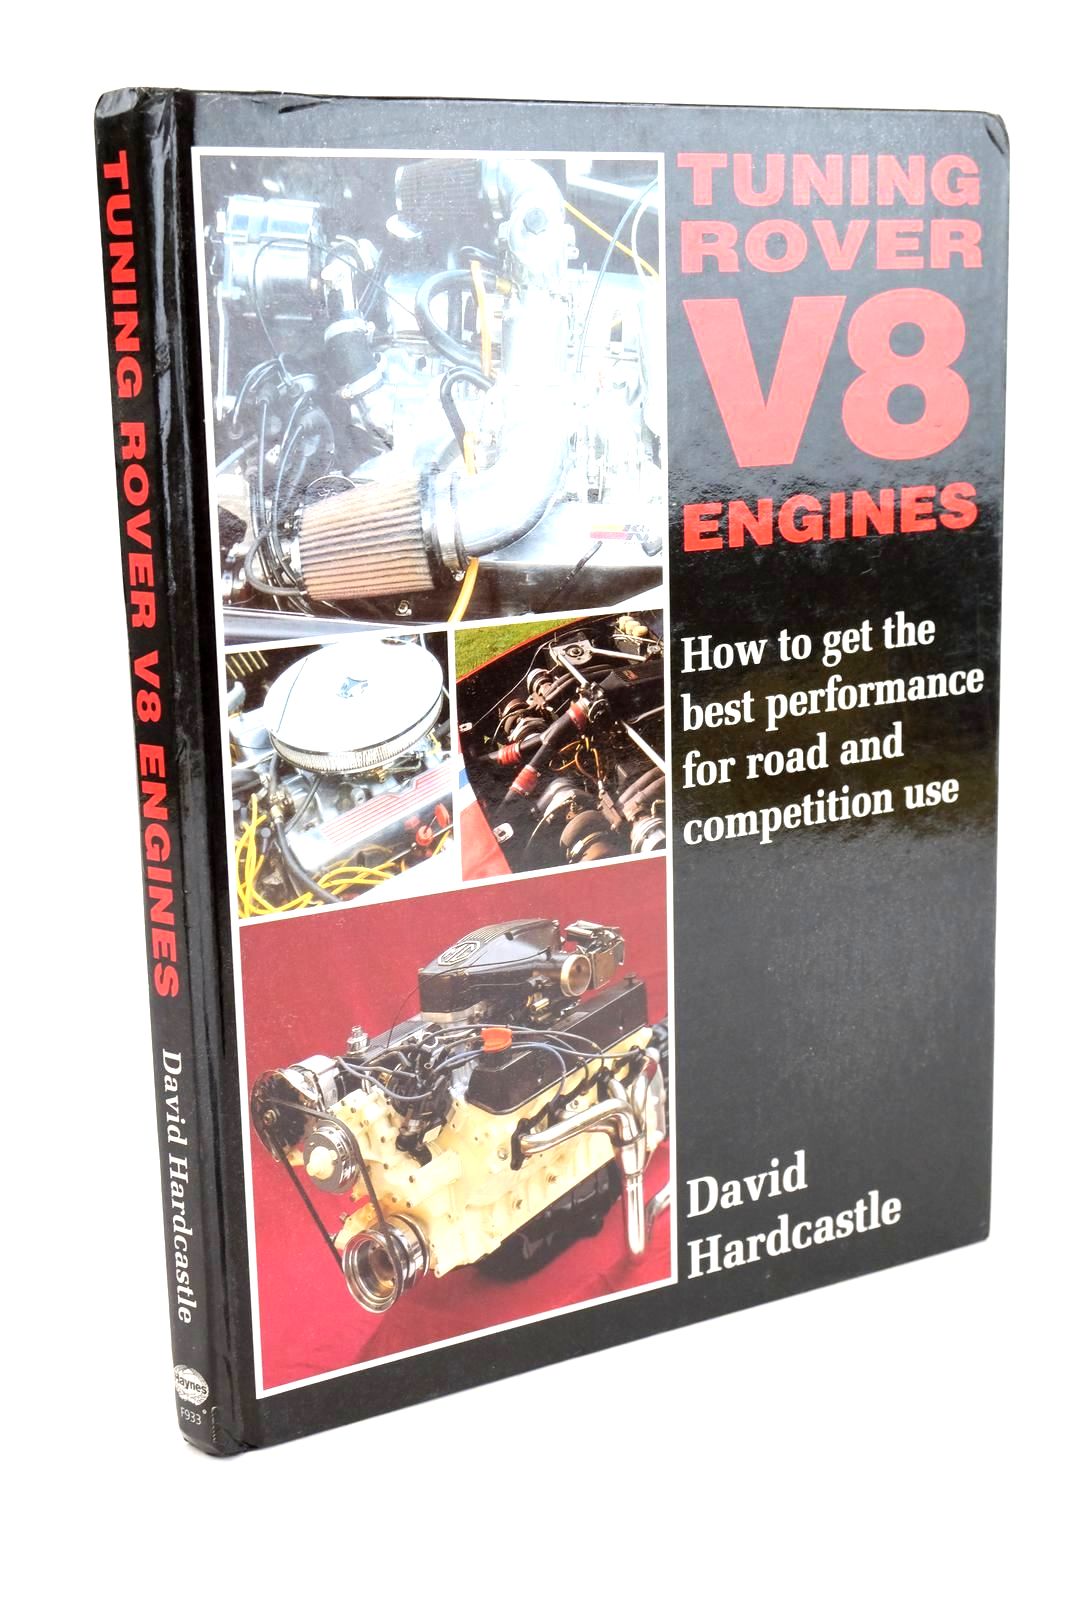 Photo of TUNING ROVER V8 ENGINES written by Hardcastle, David published by Haynes (STOCK CODE: 1324093)  for sale by Stella & Rose's Books